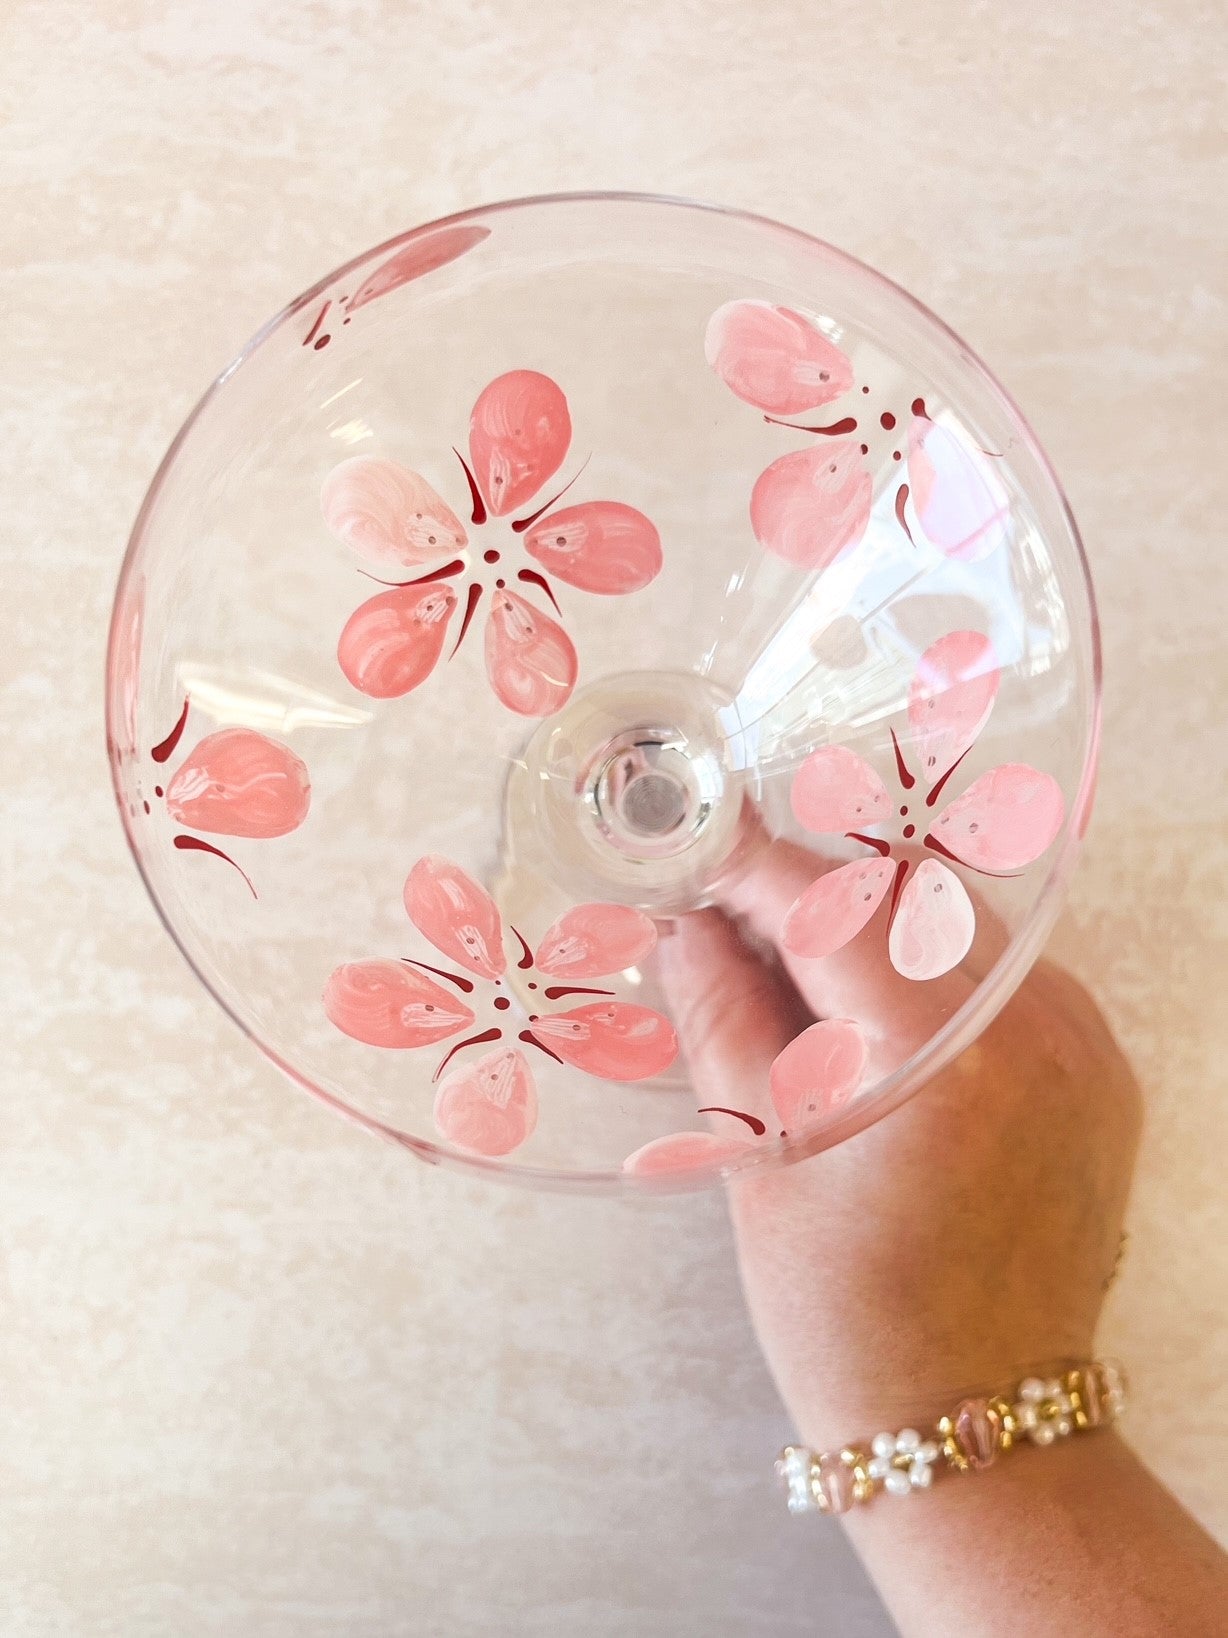 Hand-Painted Cocktail Glass | Cherry Blossom